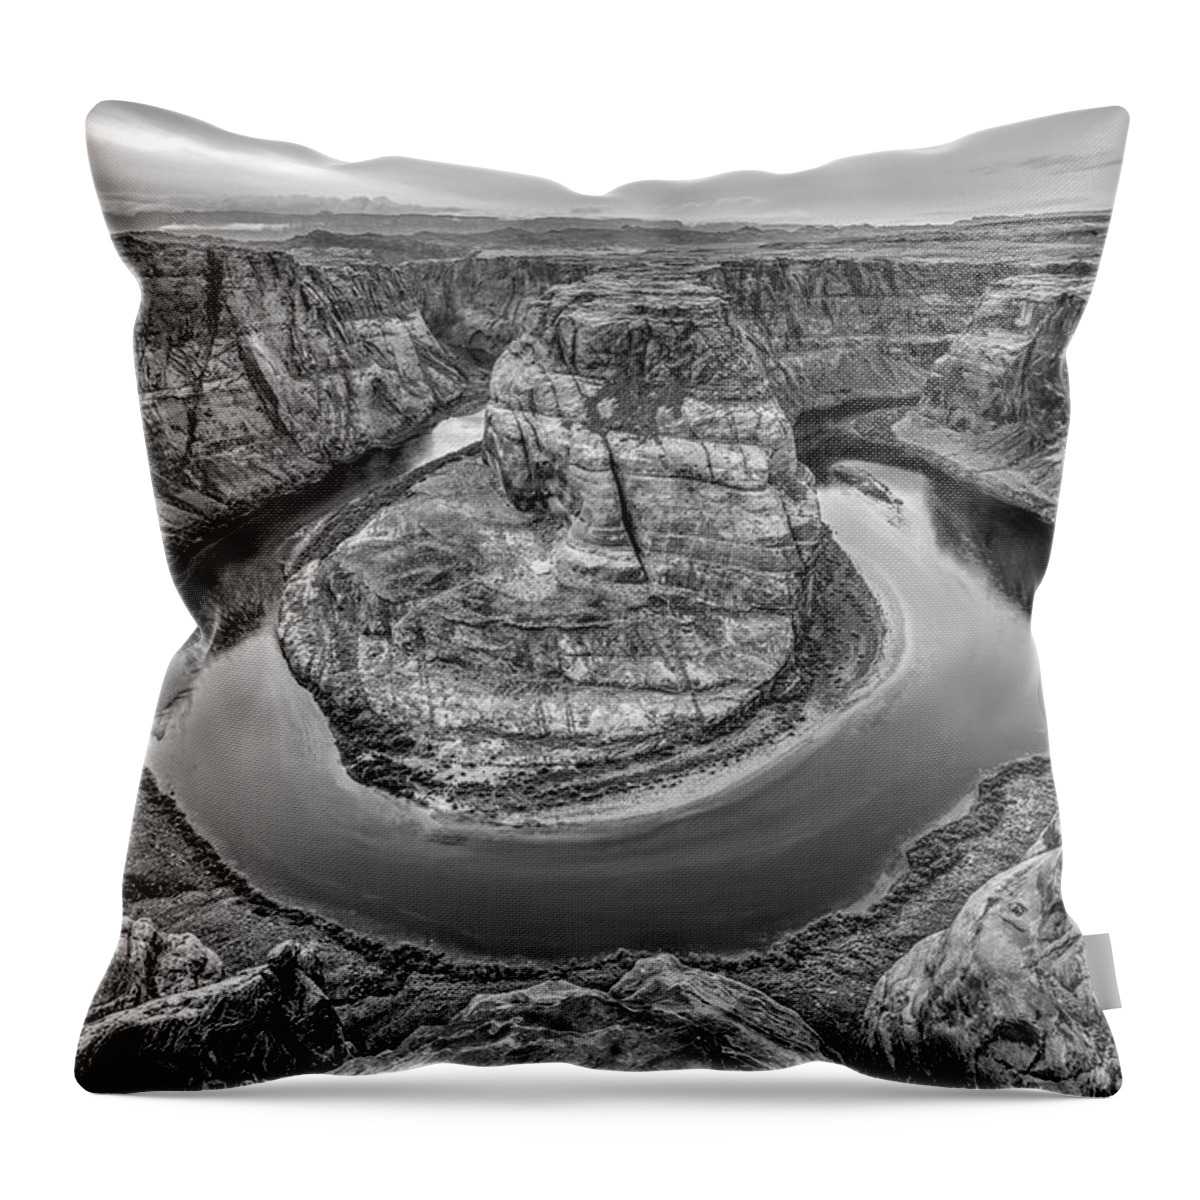 Horseshoe Bend Throw Pillow featuring the photograph Horseshoe Bend Arizona Black and White by Todd Aaron